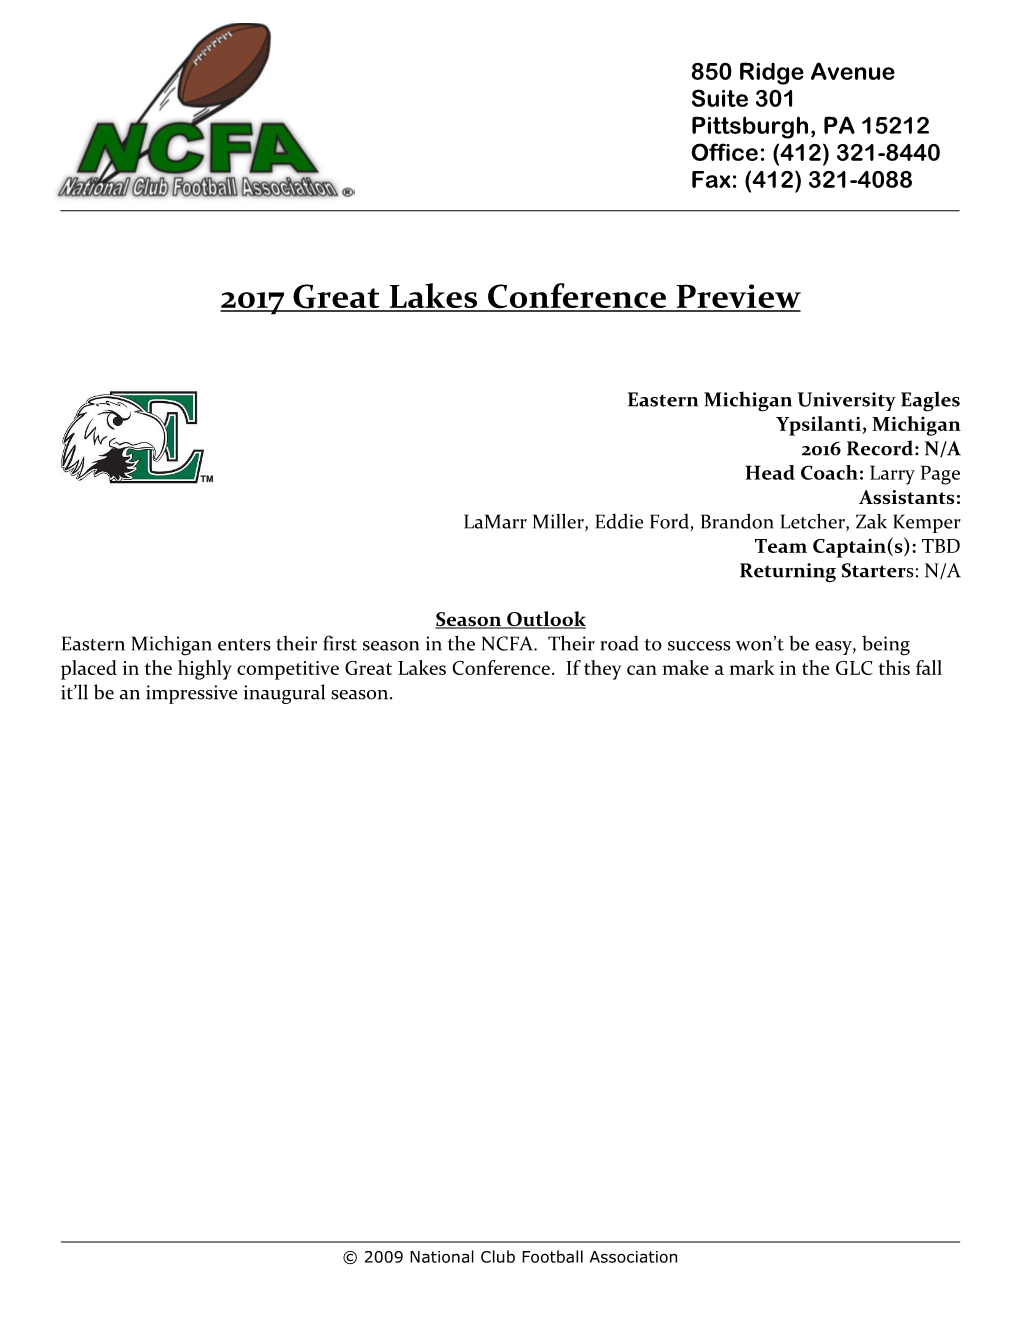 2017 Great Lakes Conference Preview